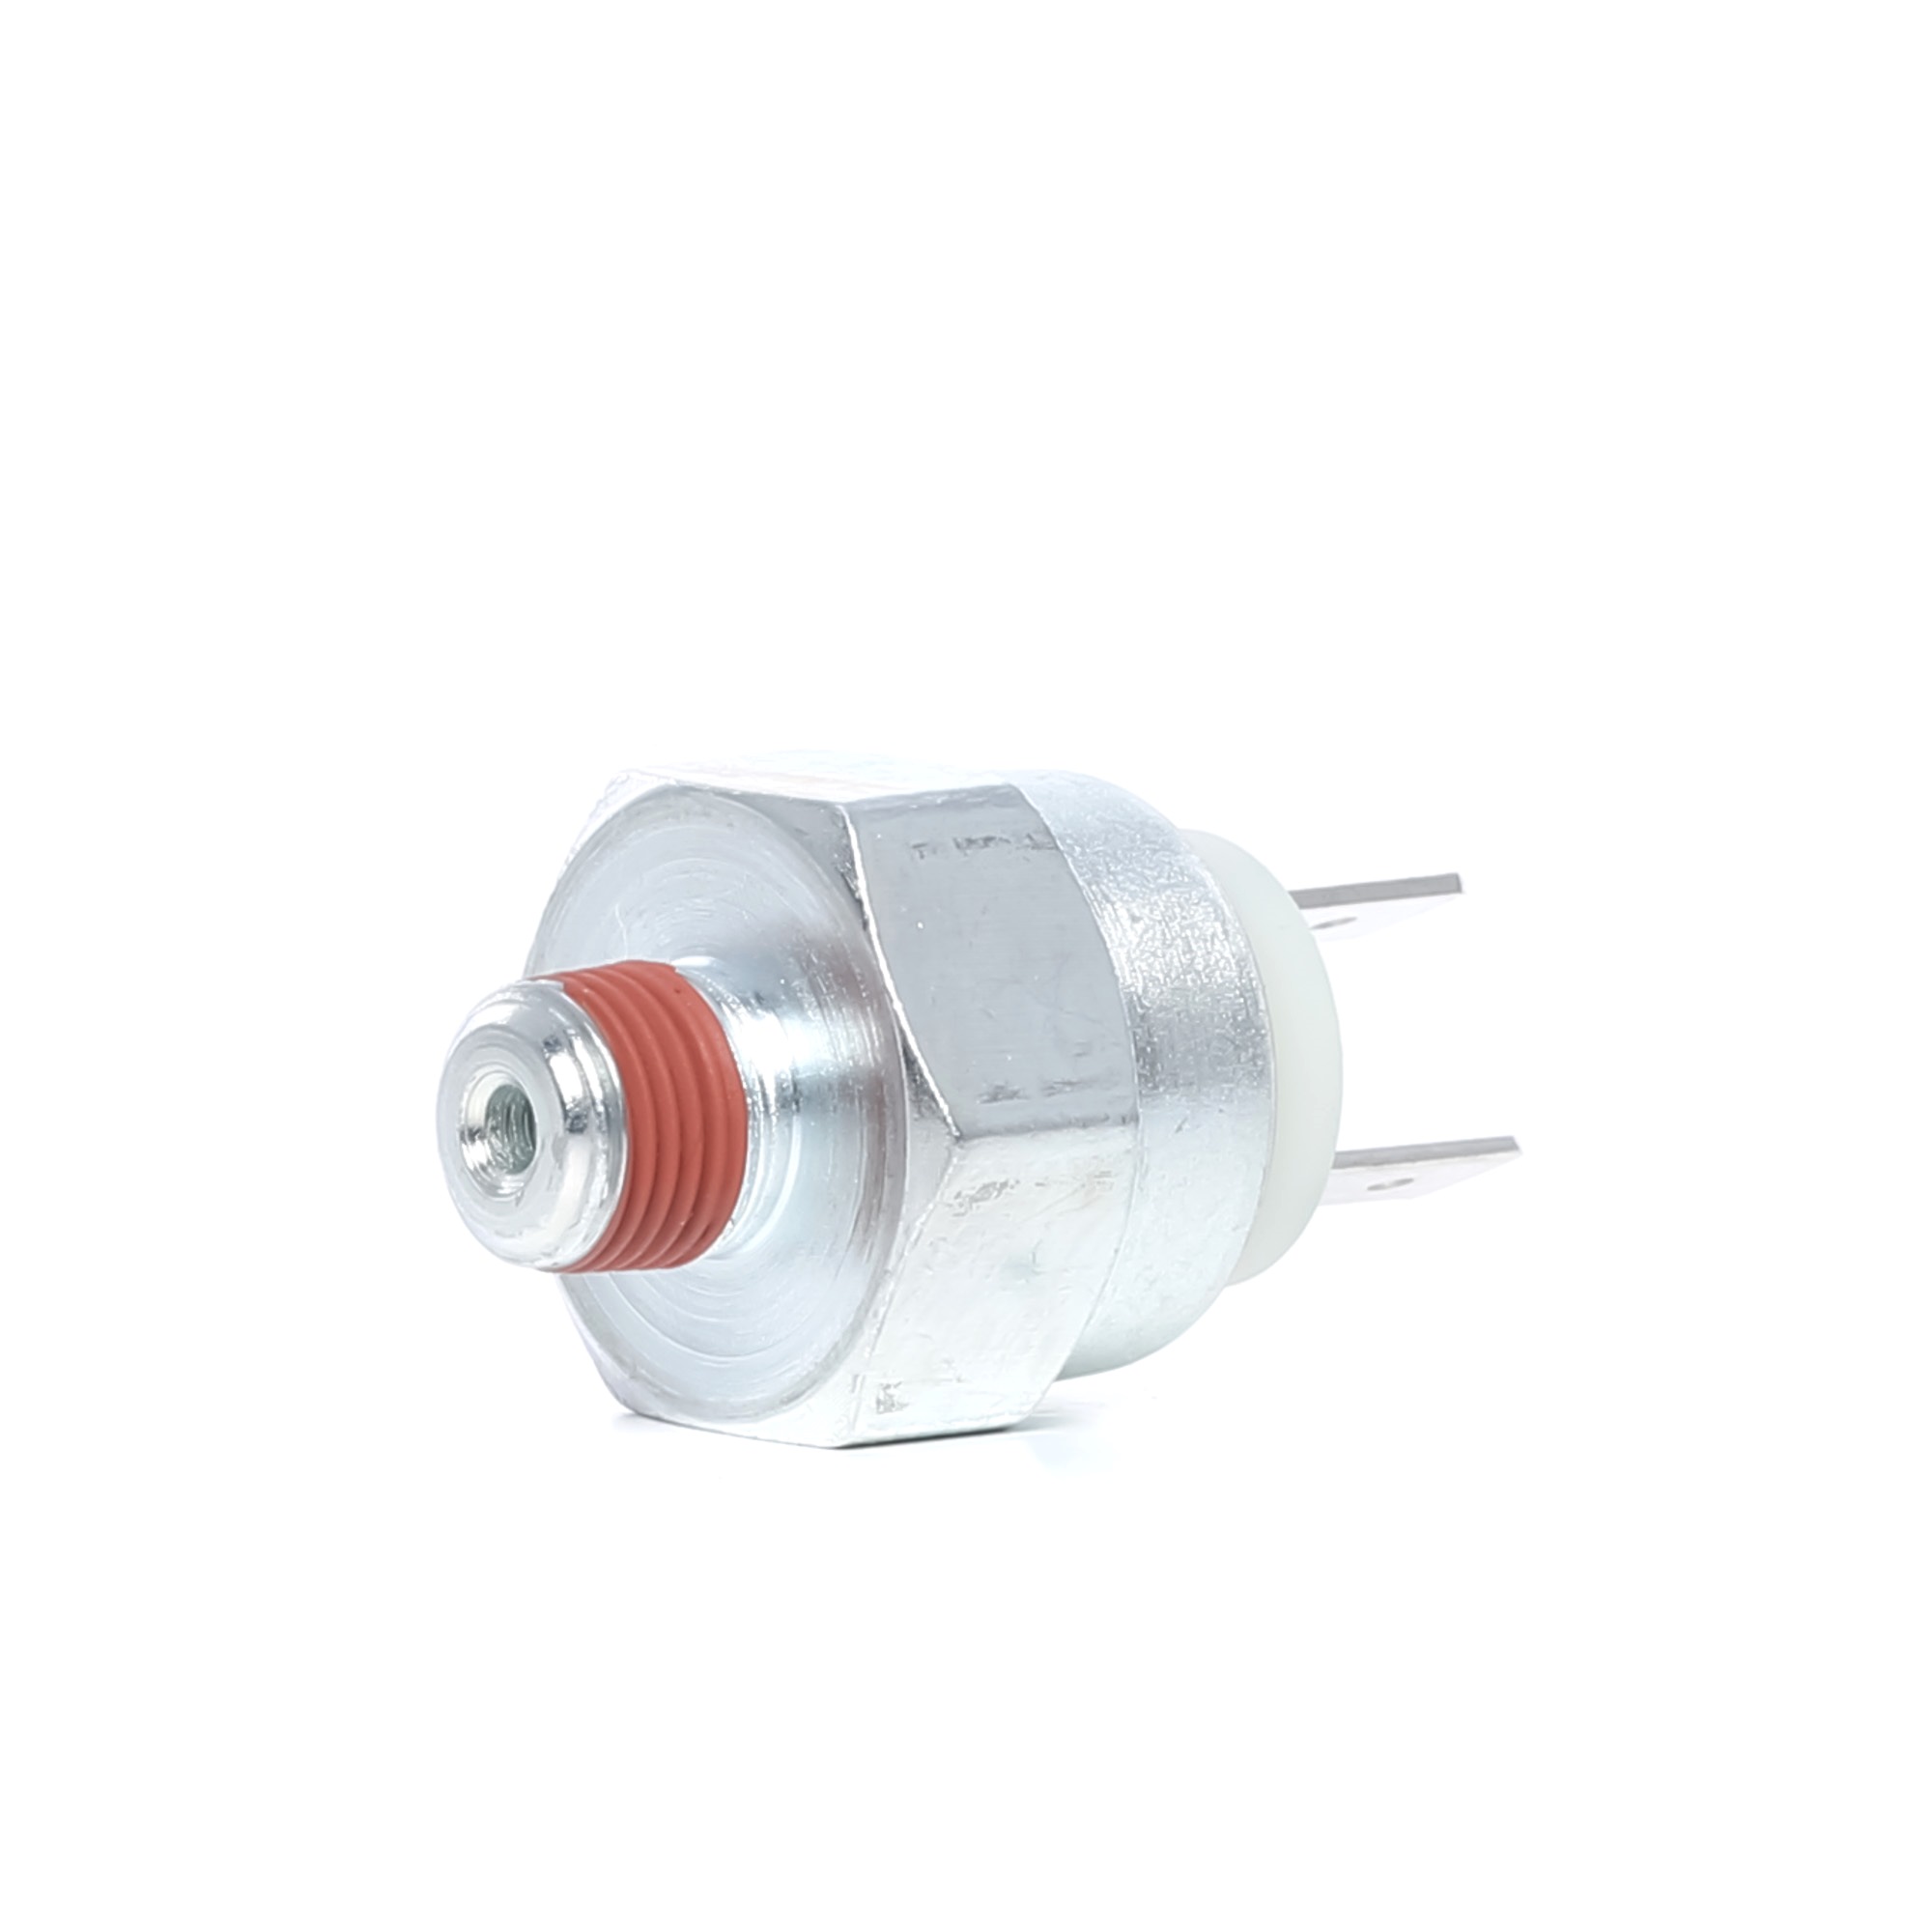 MEX0229 MEYLE Electric-hydraulic, M10 x 1, 2-pin connector, ORIGINAL Quality Number of pins: 2-pin connector Stop light switch 100 890 0009 buy